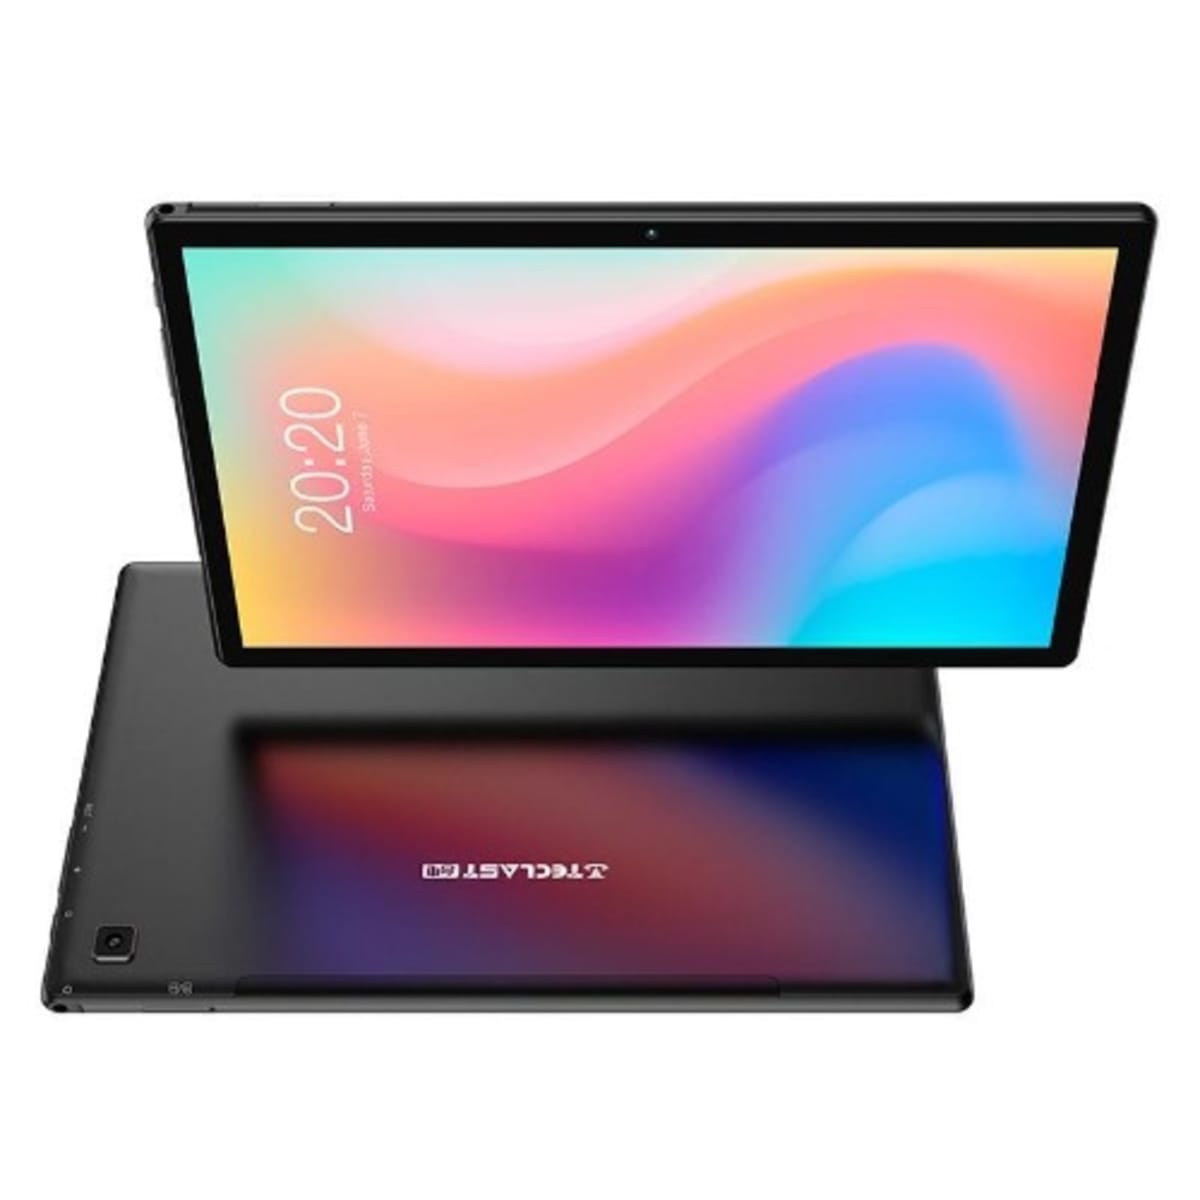 Teclast M40 Air presented with Android 11, a 10.1-inch display and